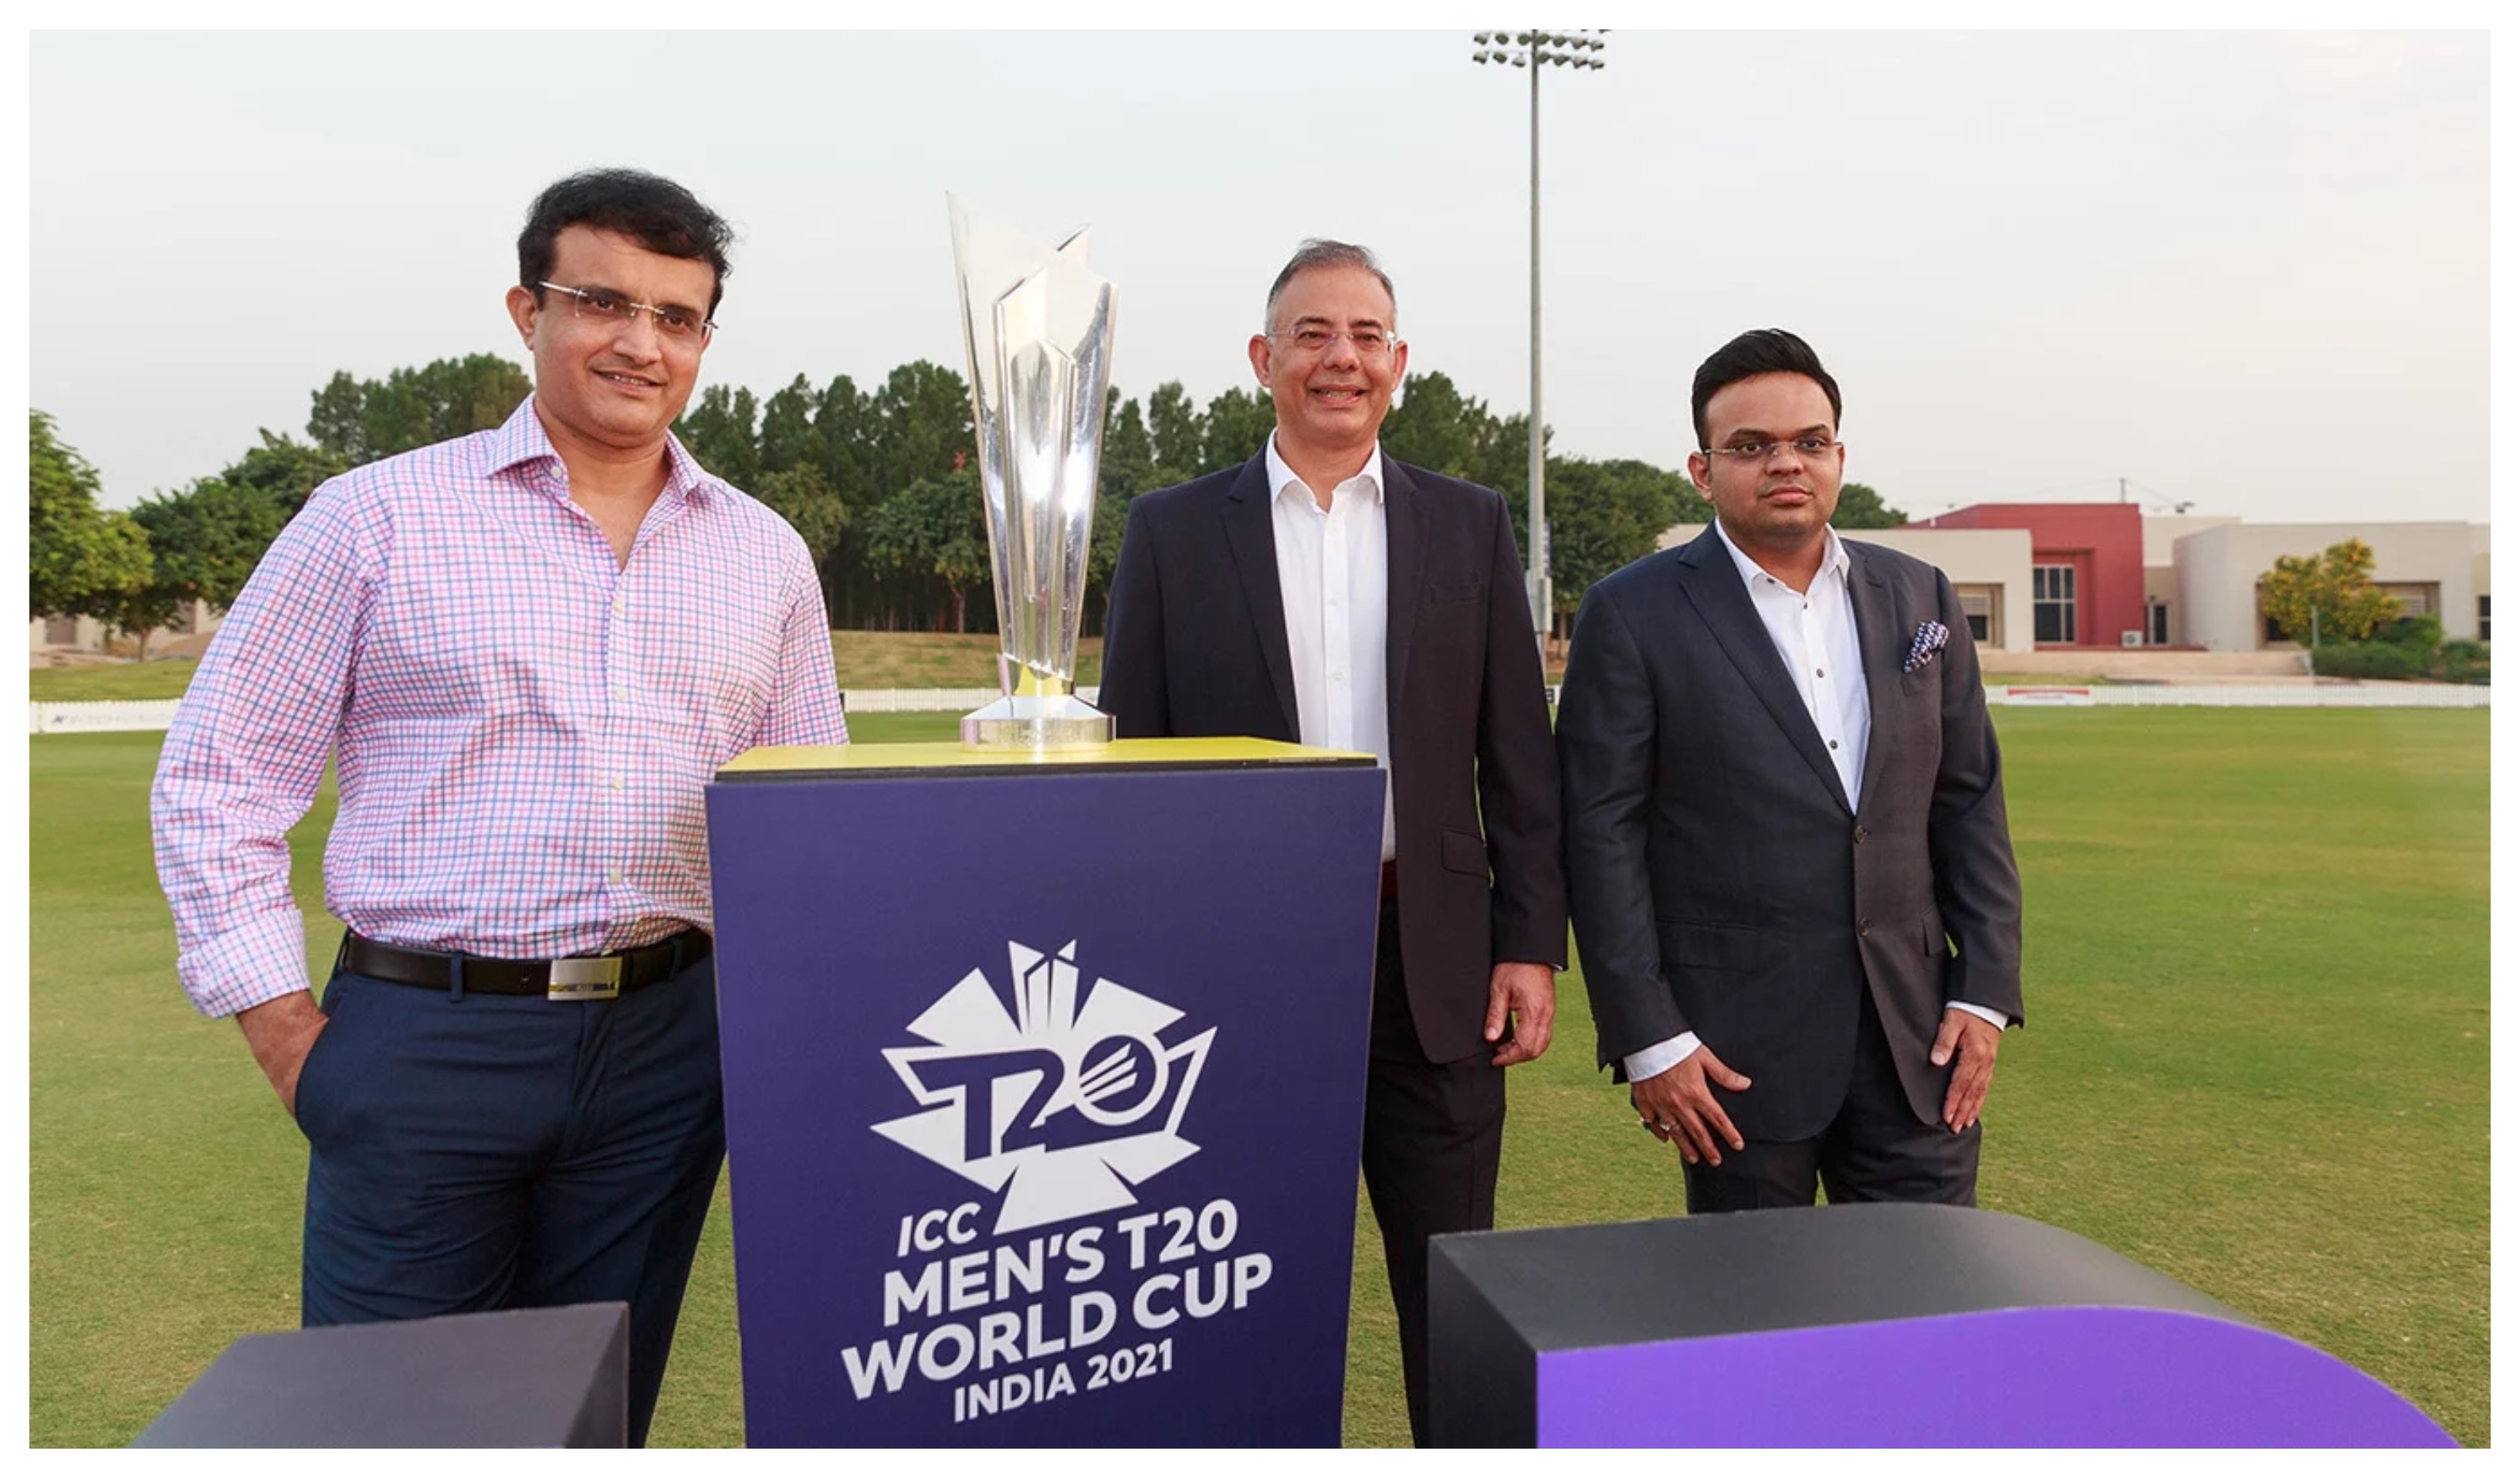 UAE and Oman are likely to host the ICC Men's T20 World Cup 2021 | ICC/Twitter